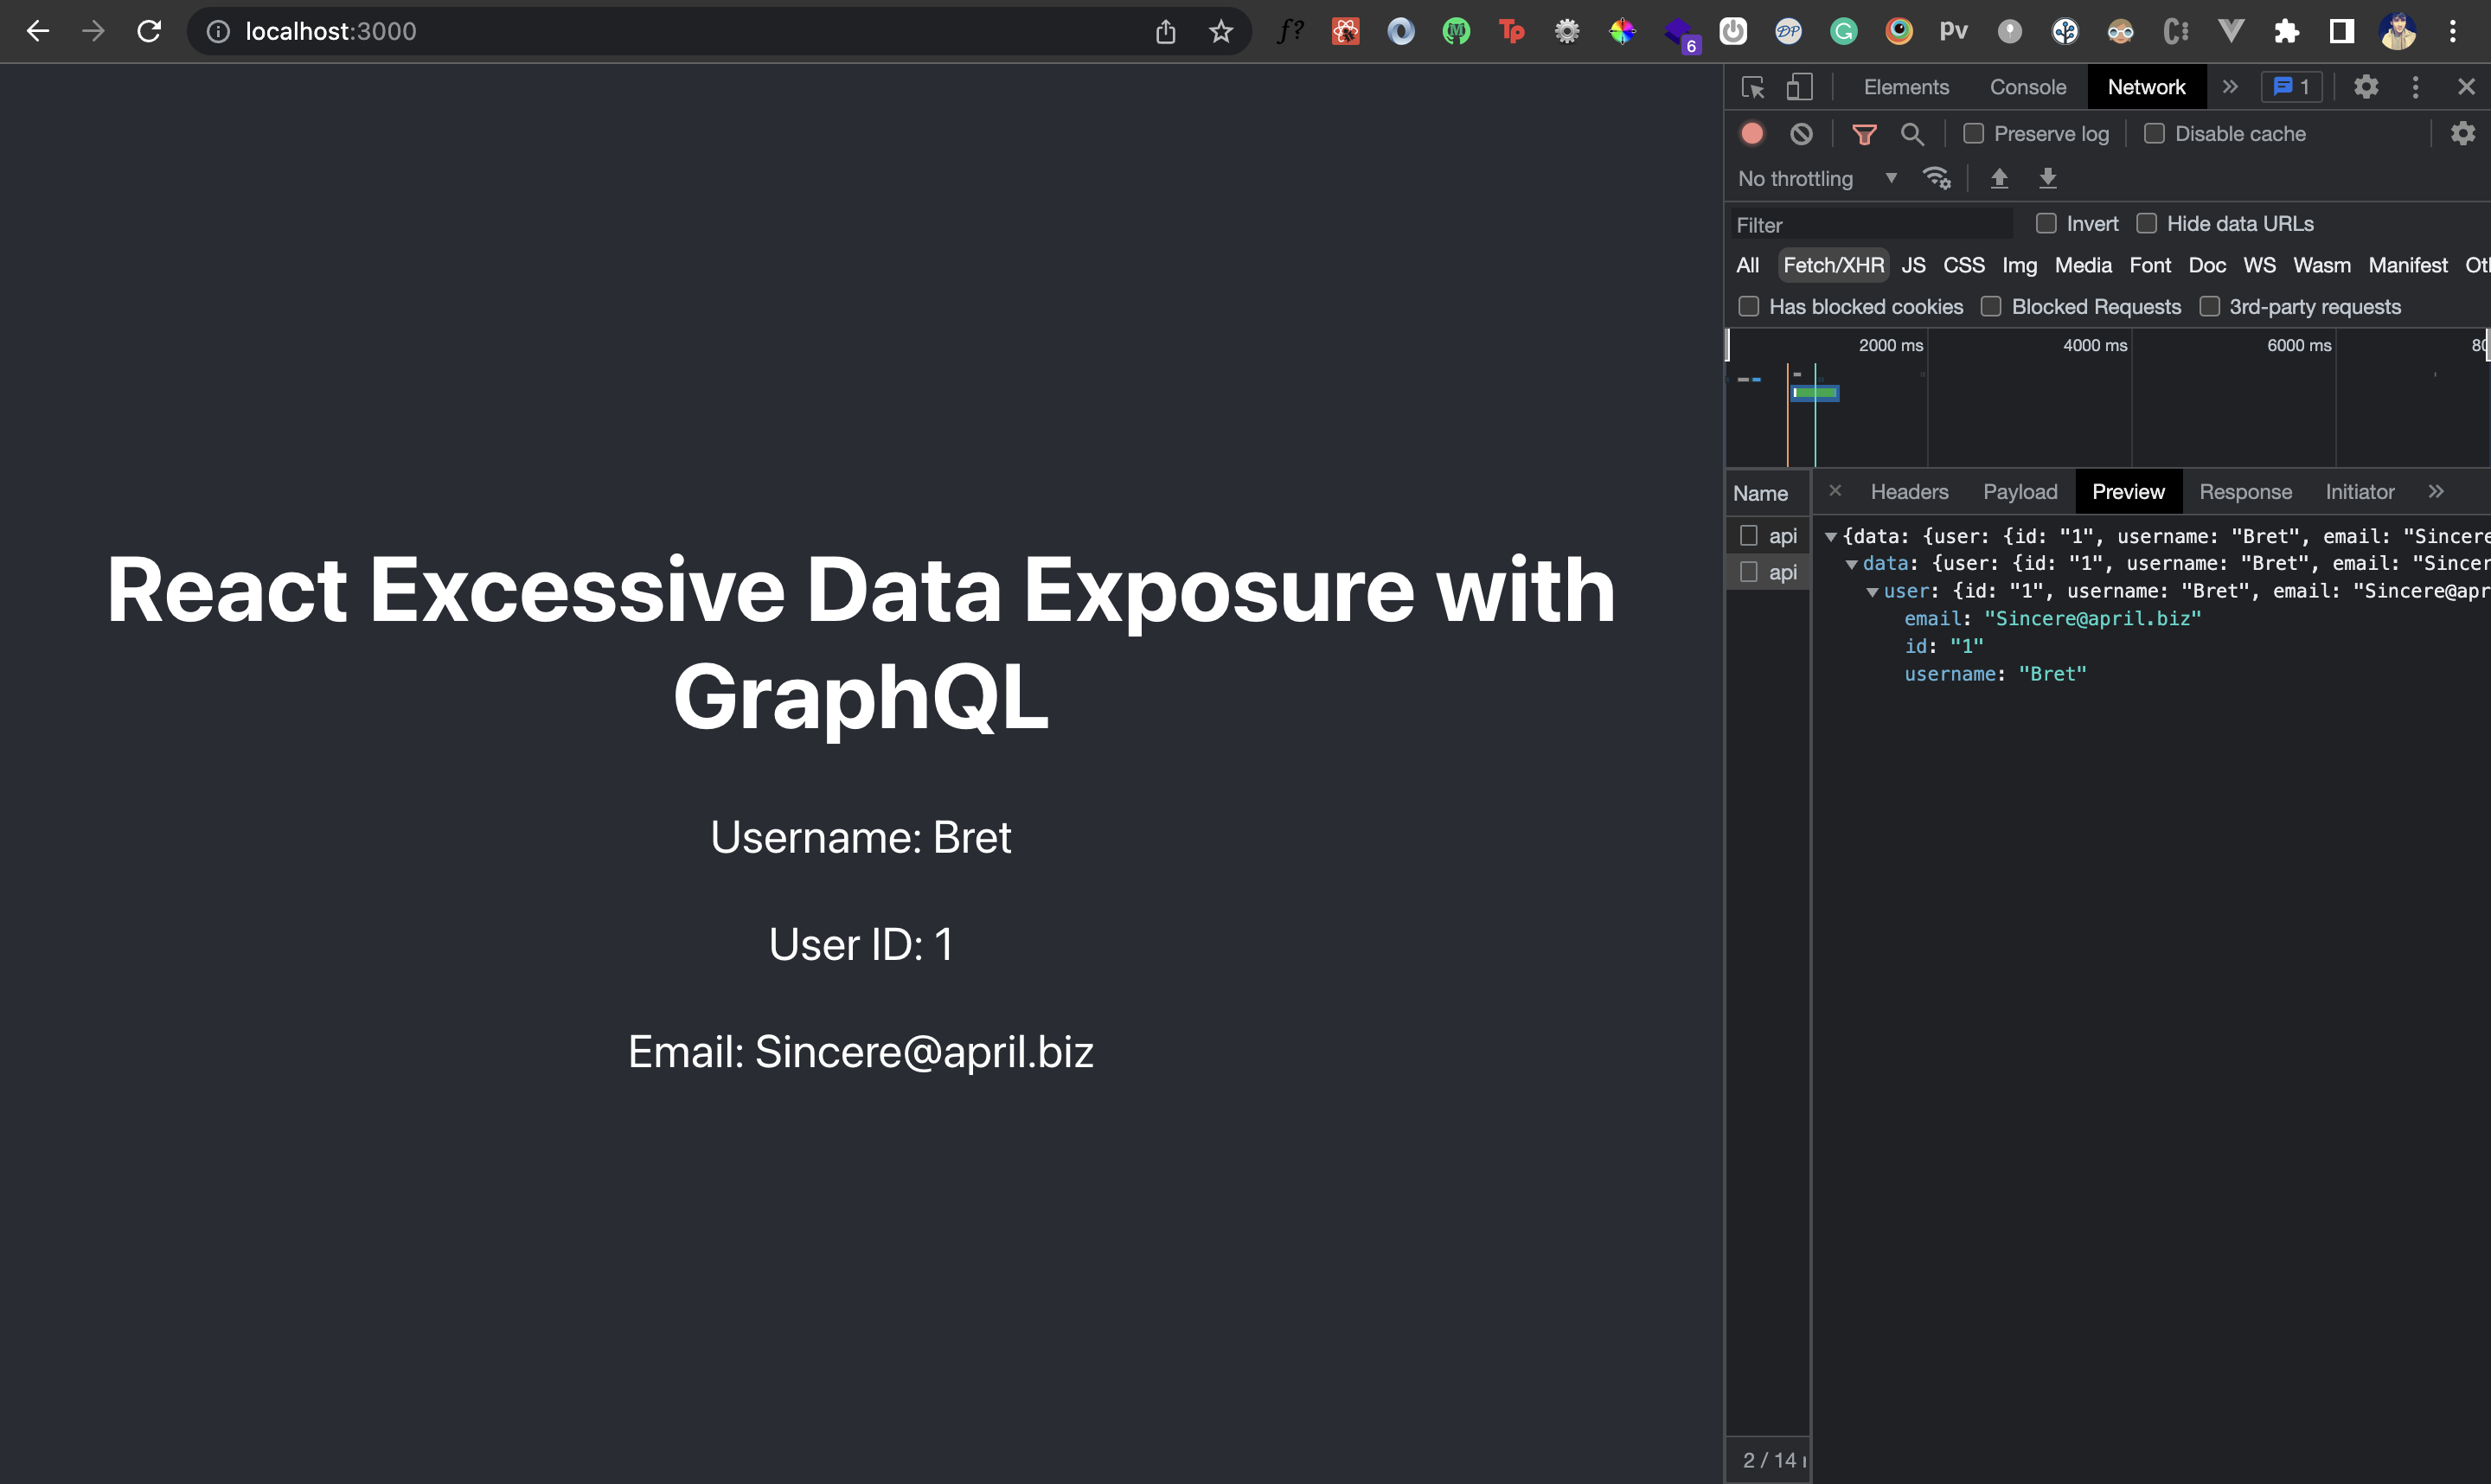 React Excessive Data Exposure: Examples and Prevention image